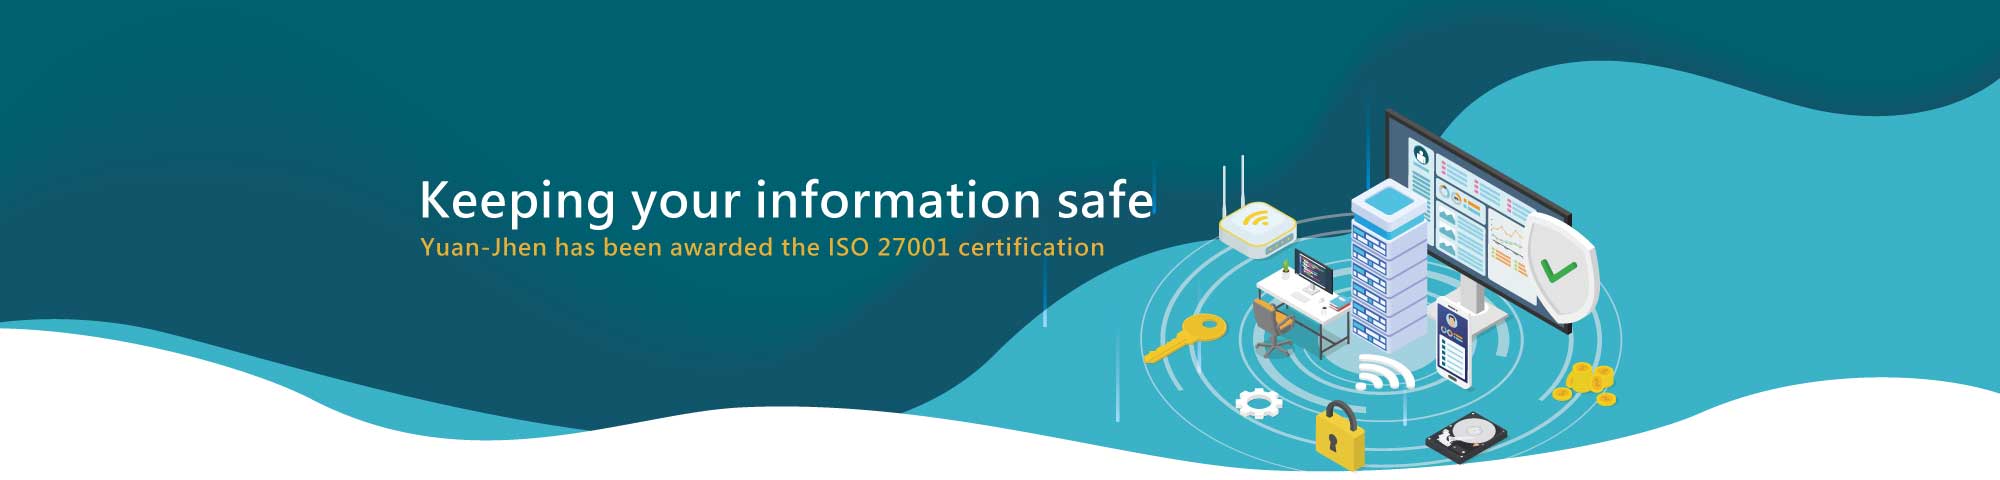 Yuan-Jhen has been awarded the ISO 27001 certification 